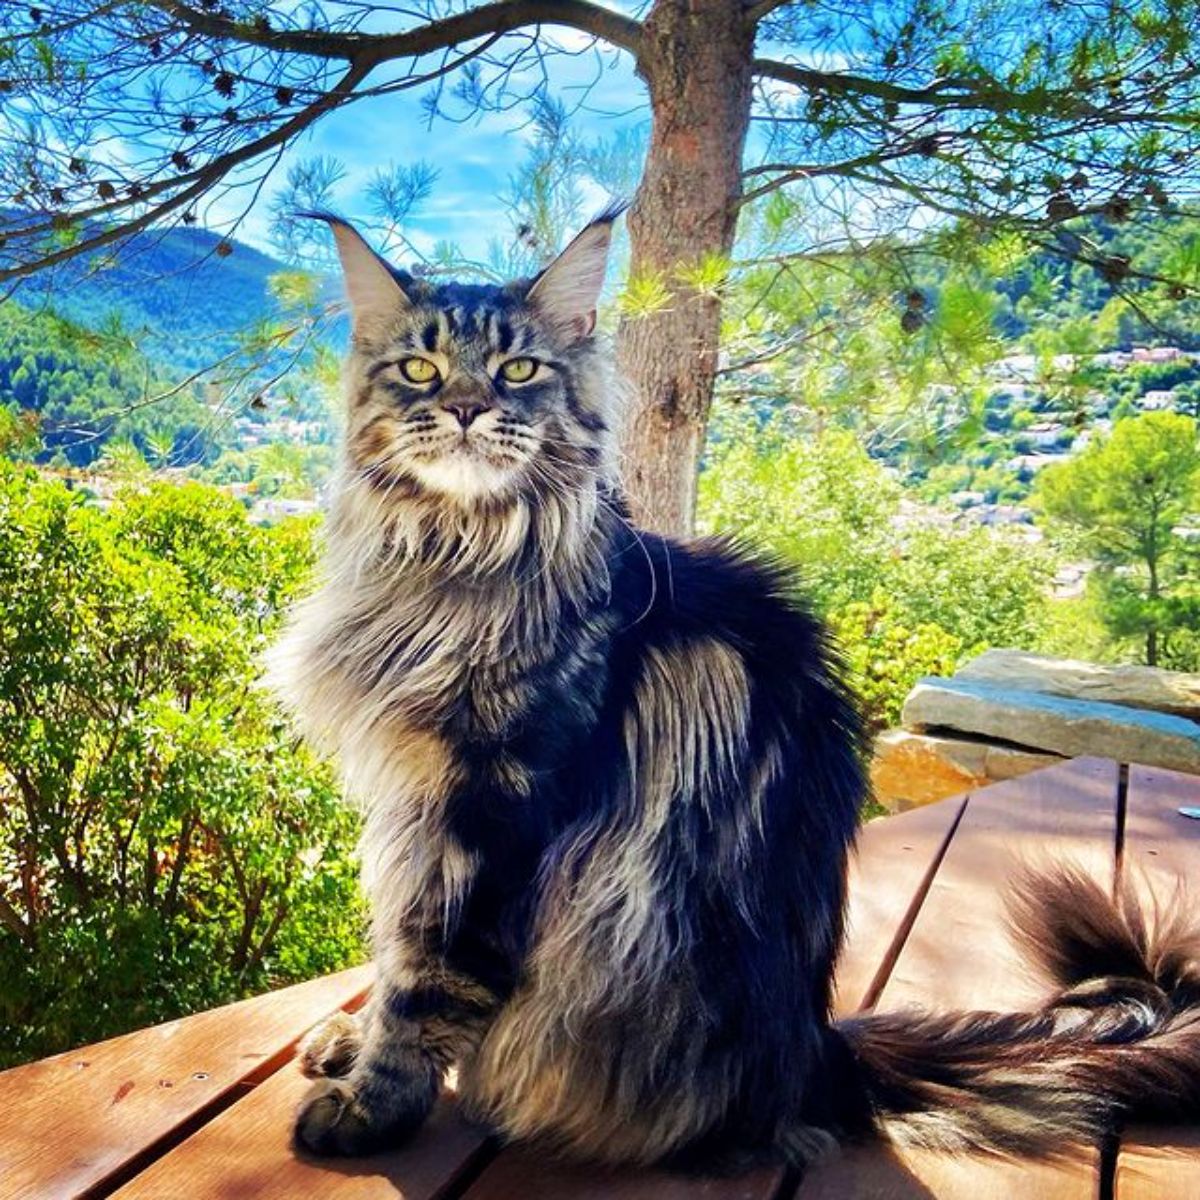 A fluffy maine coon sitting on a wooden table.